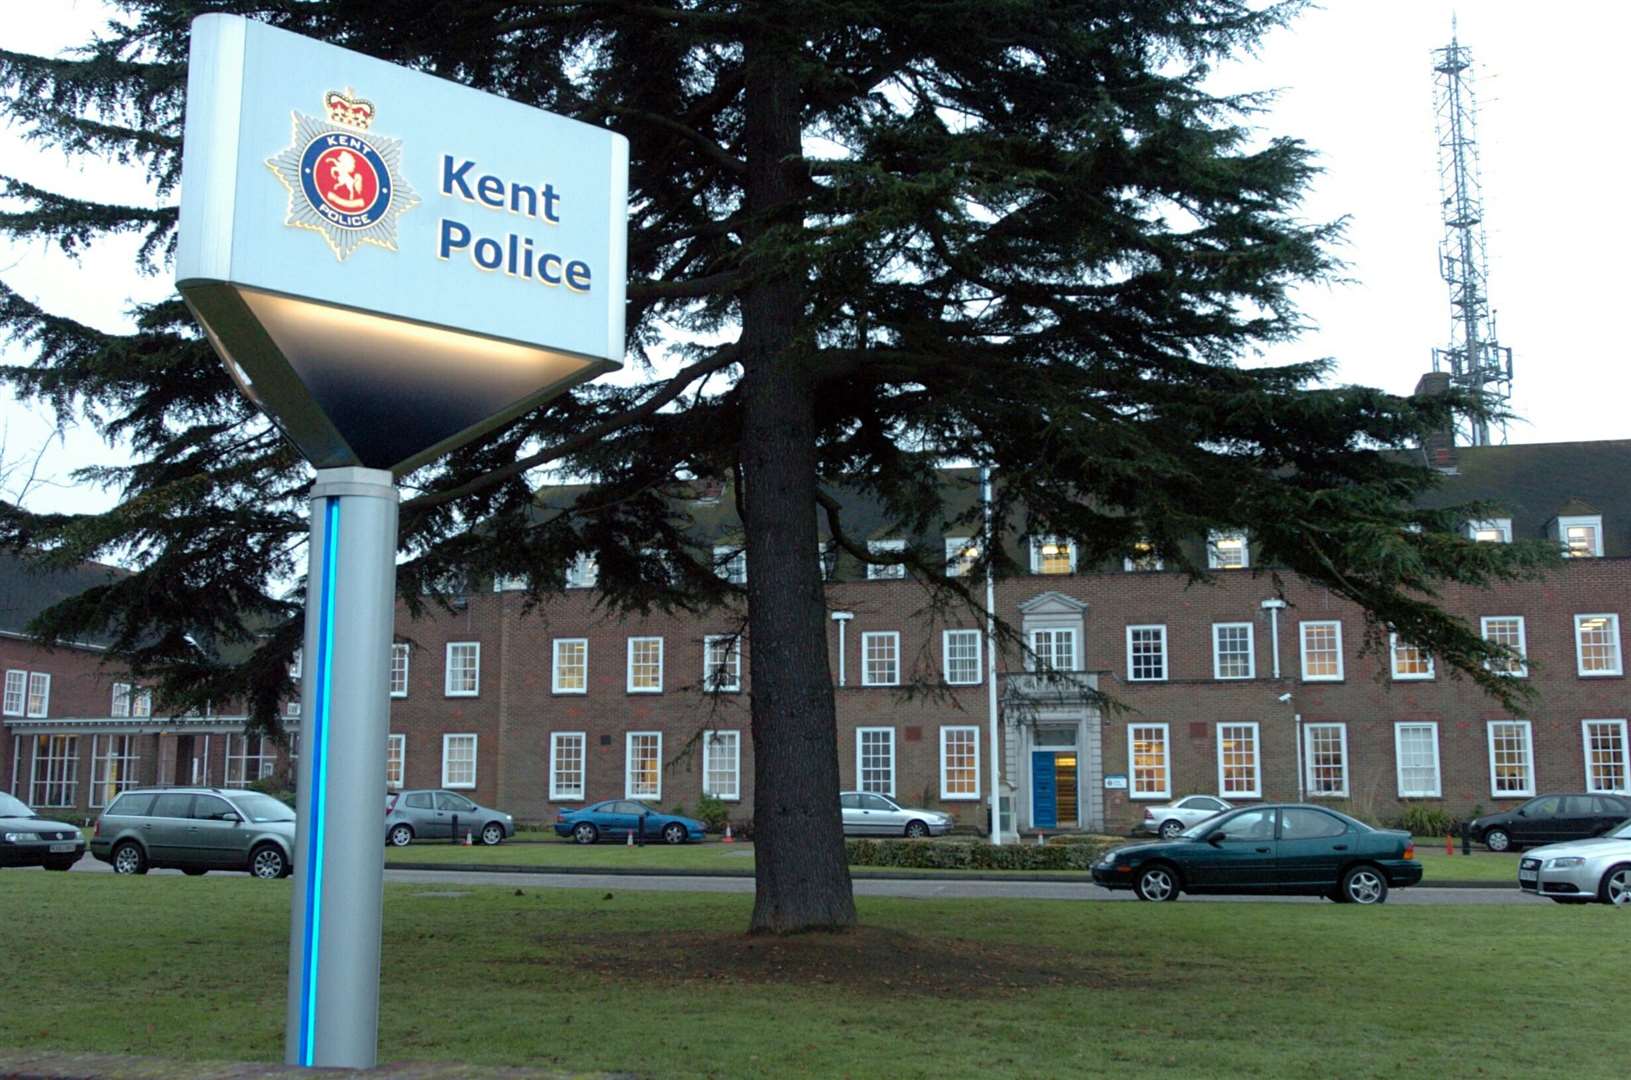 Kent Police has agreed to pay the woman a five-figure settlement